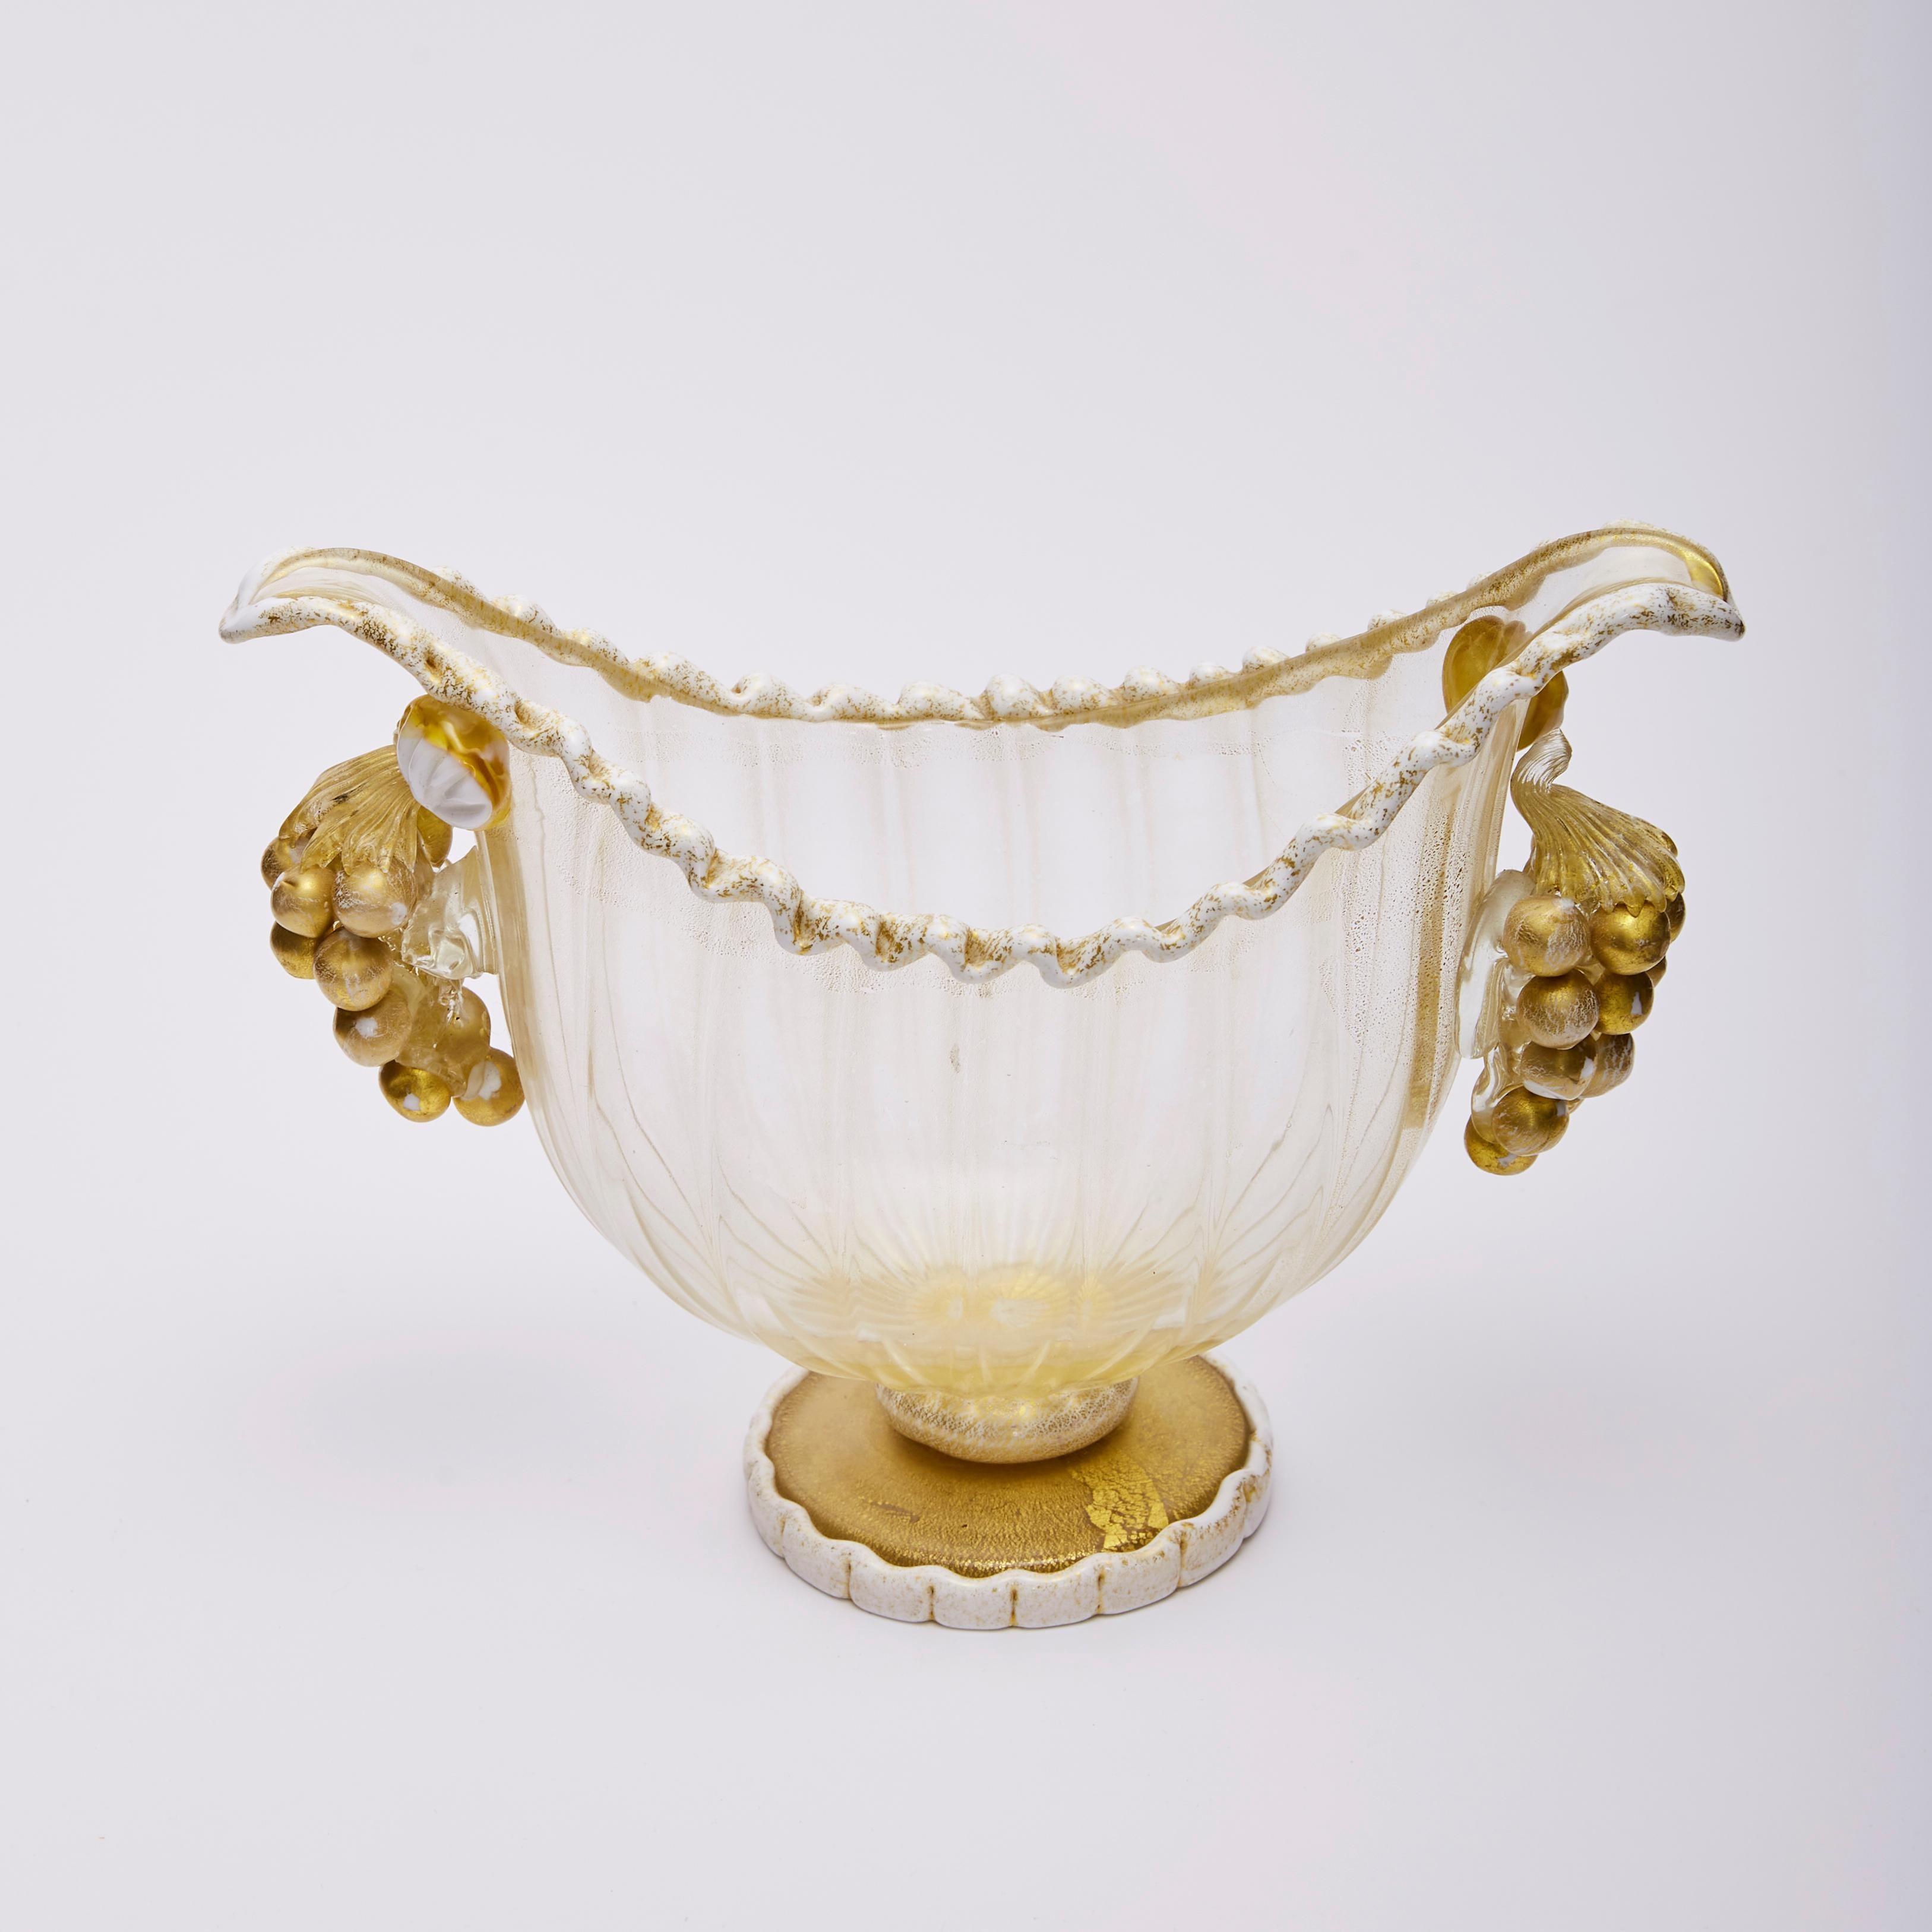 Footed Bowl Gold Leaf and Grapes, Ercole Barovier for Barovier Toso & Co 1949 In Excellent Condition For Sale In London, GB